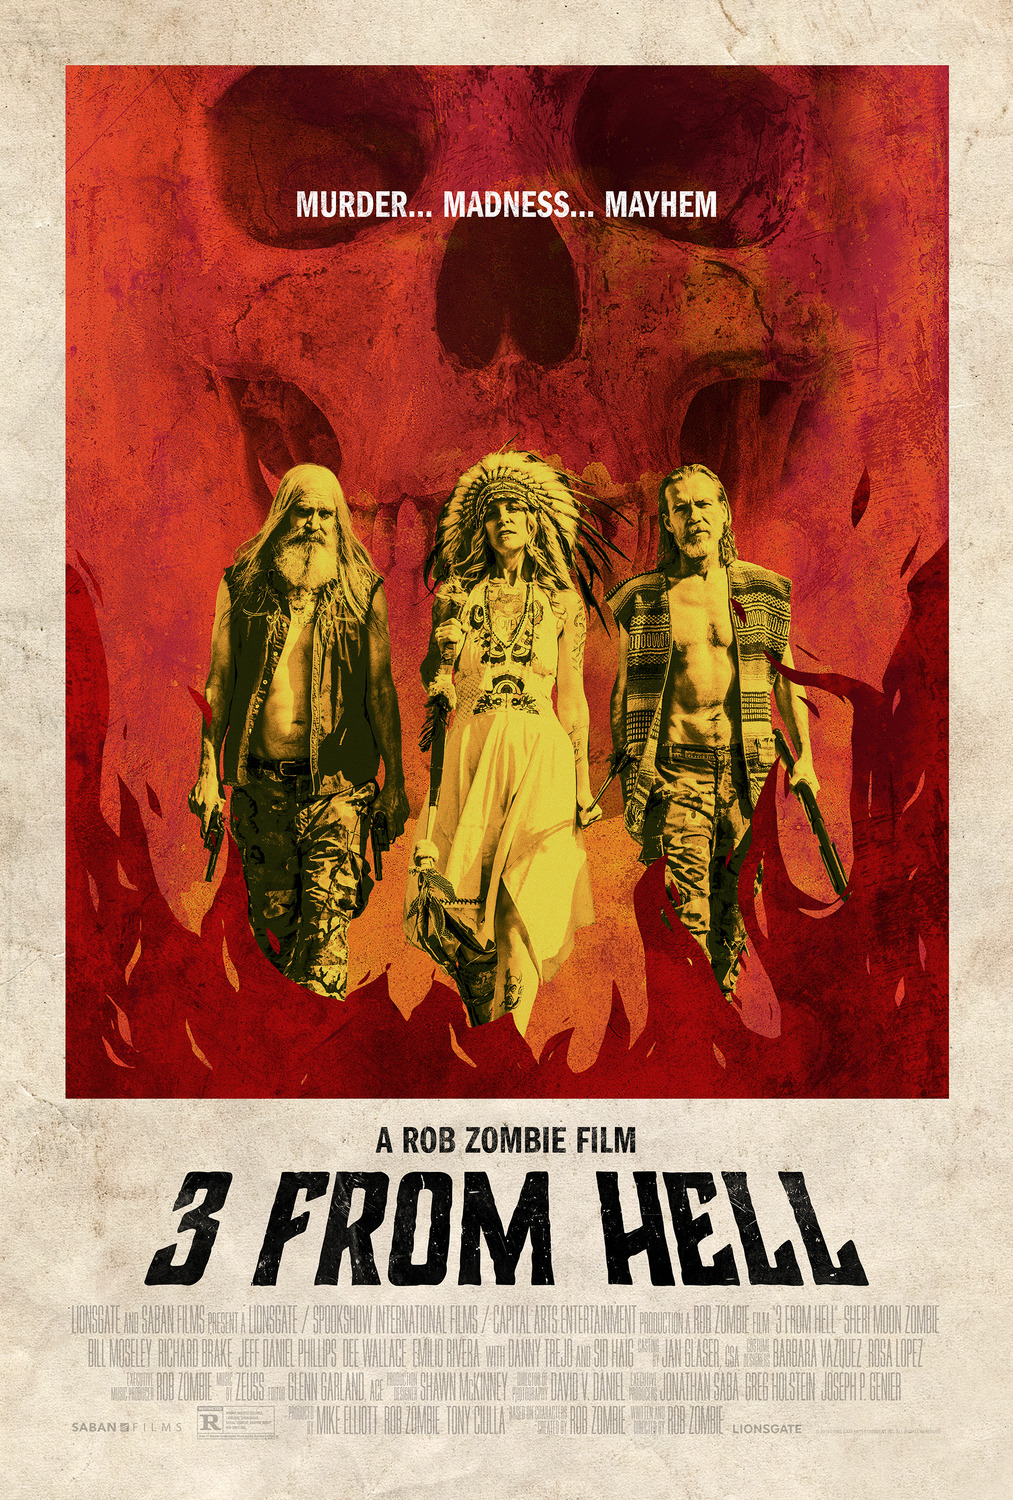 3 From Hell Review